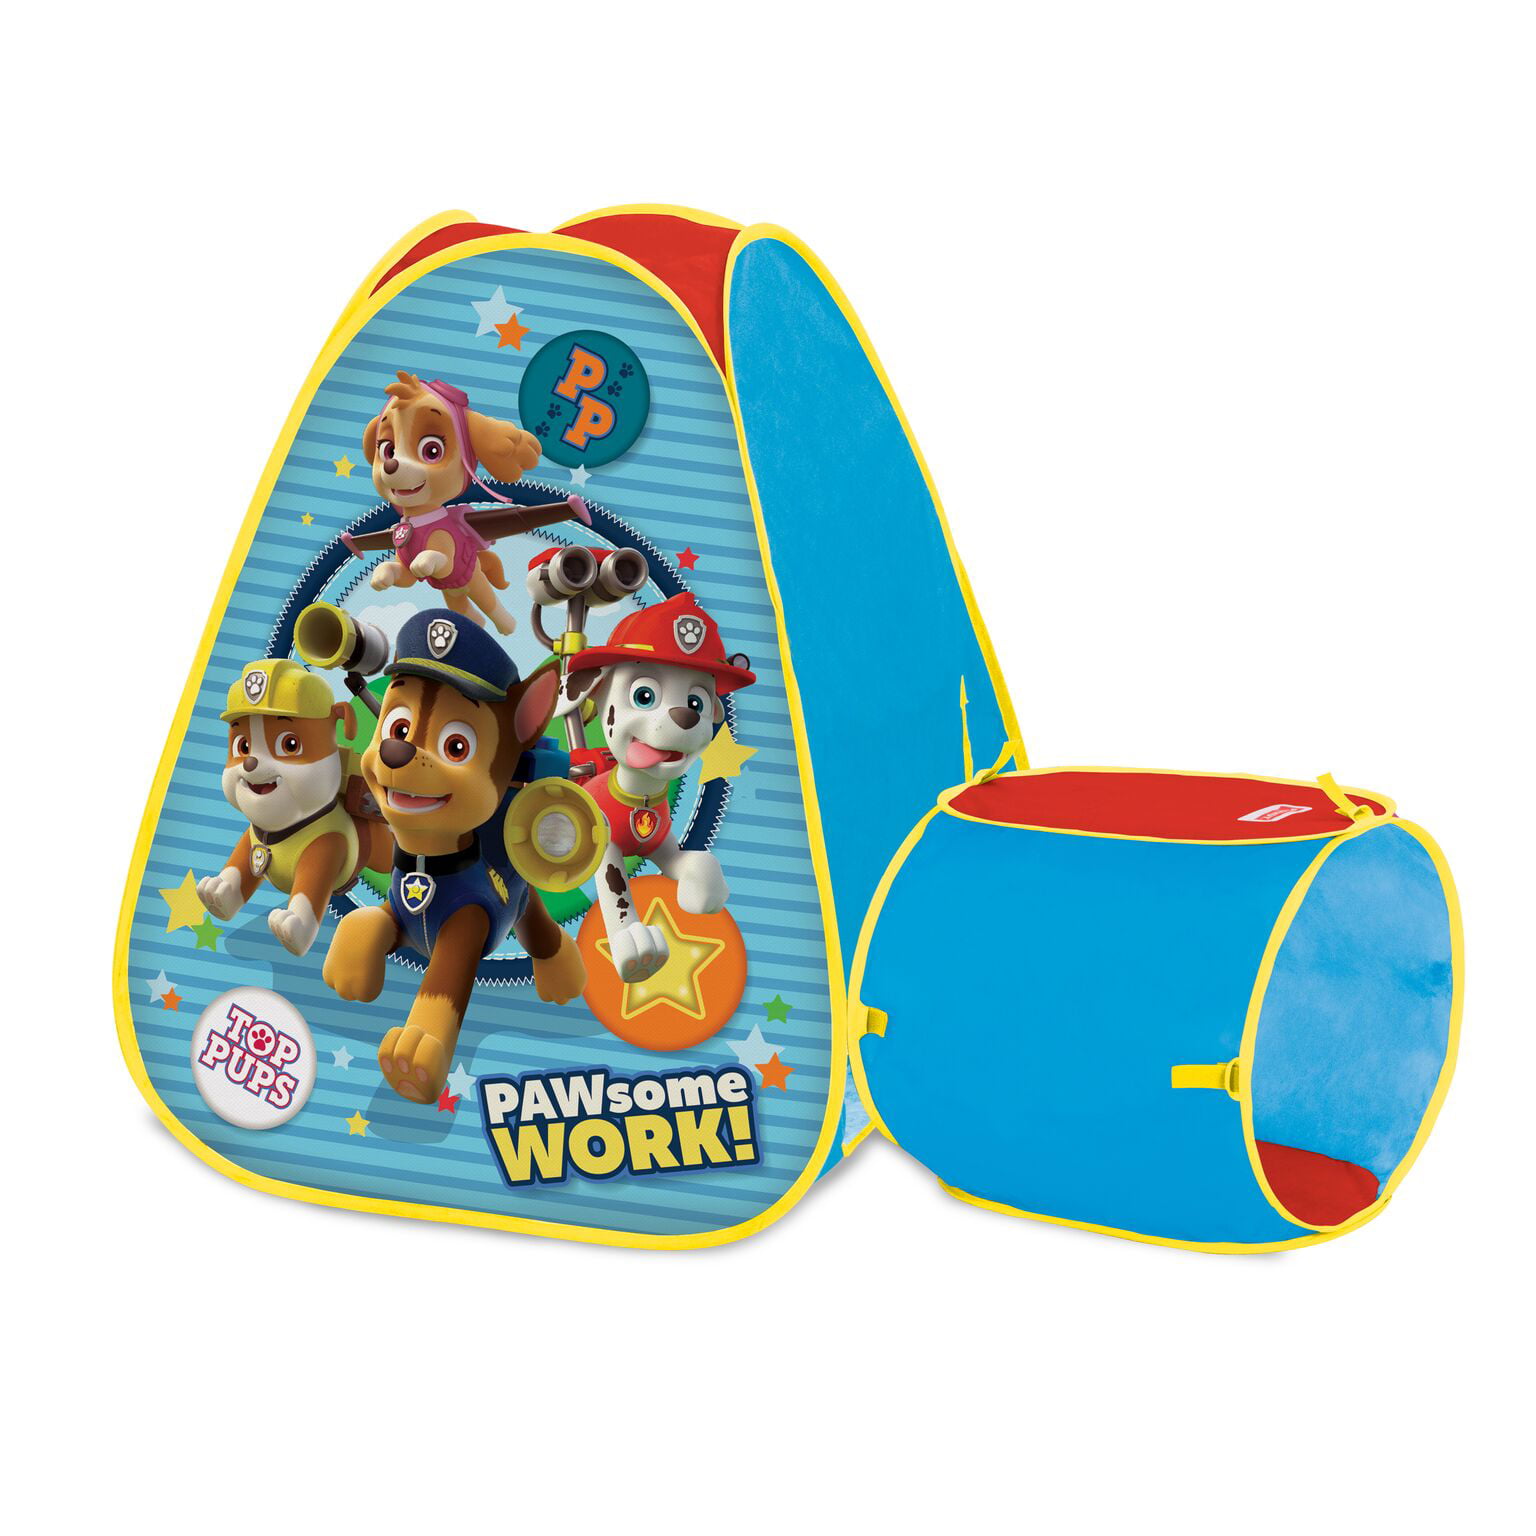 Playhut Paw Patrol 2-in-1 Bed Tent Playhouse